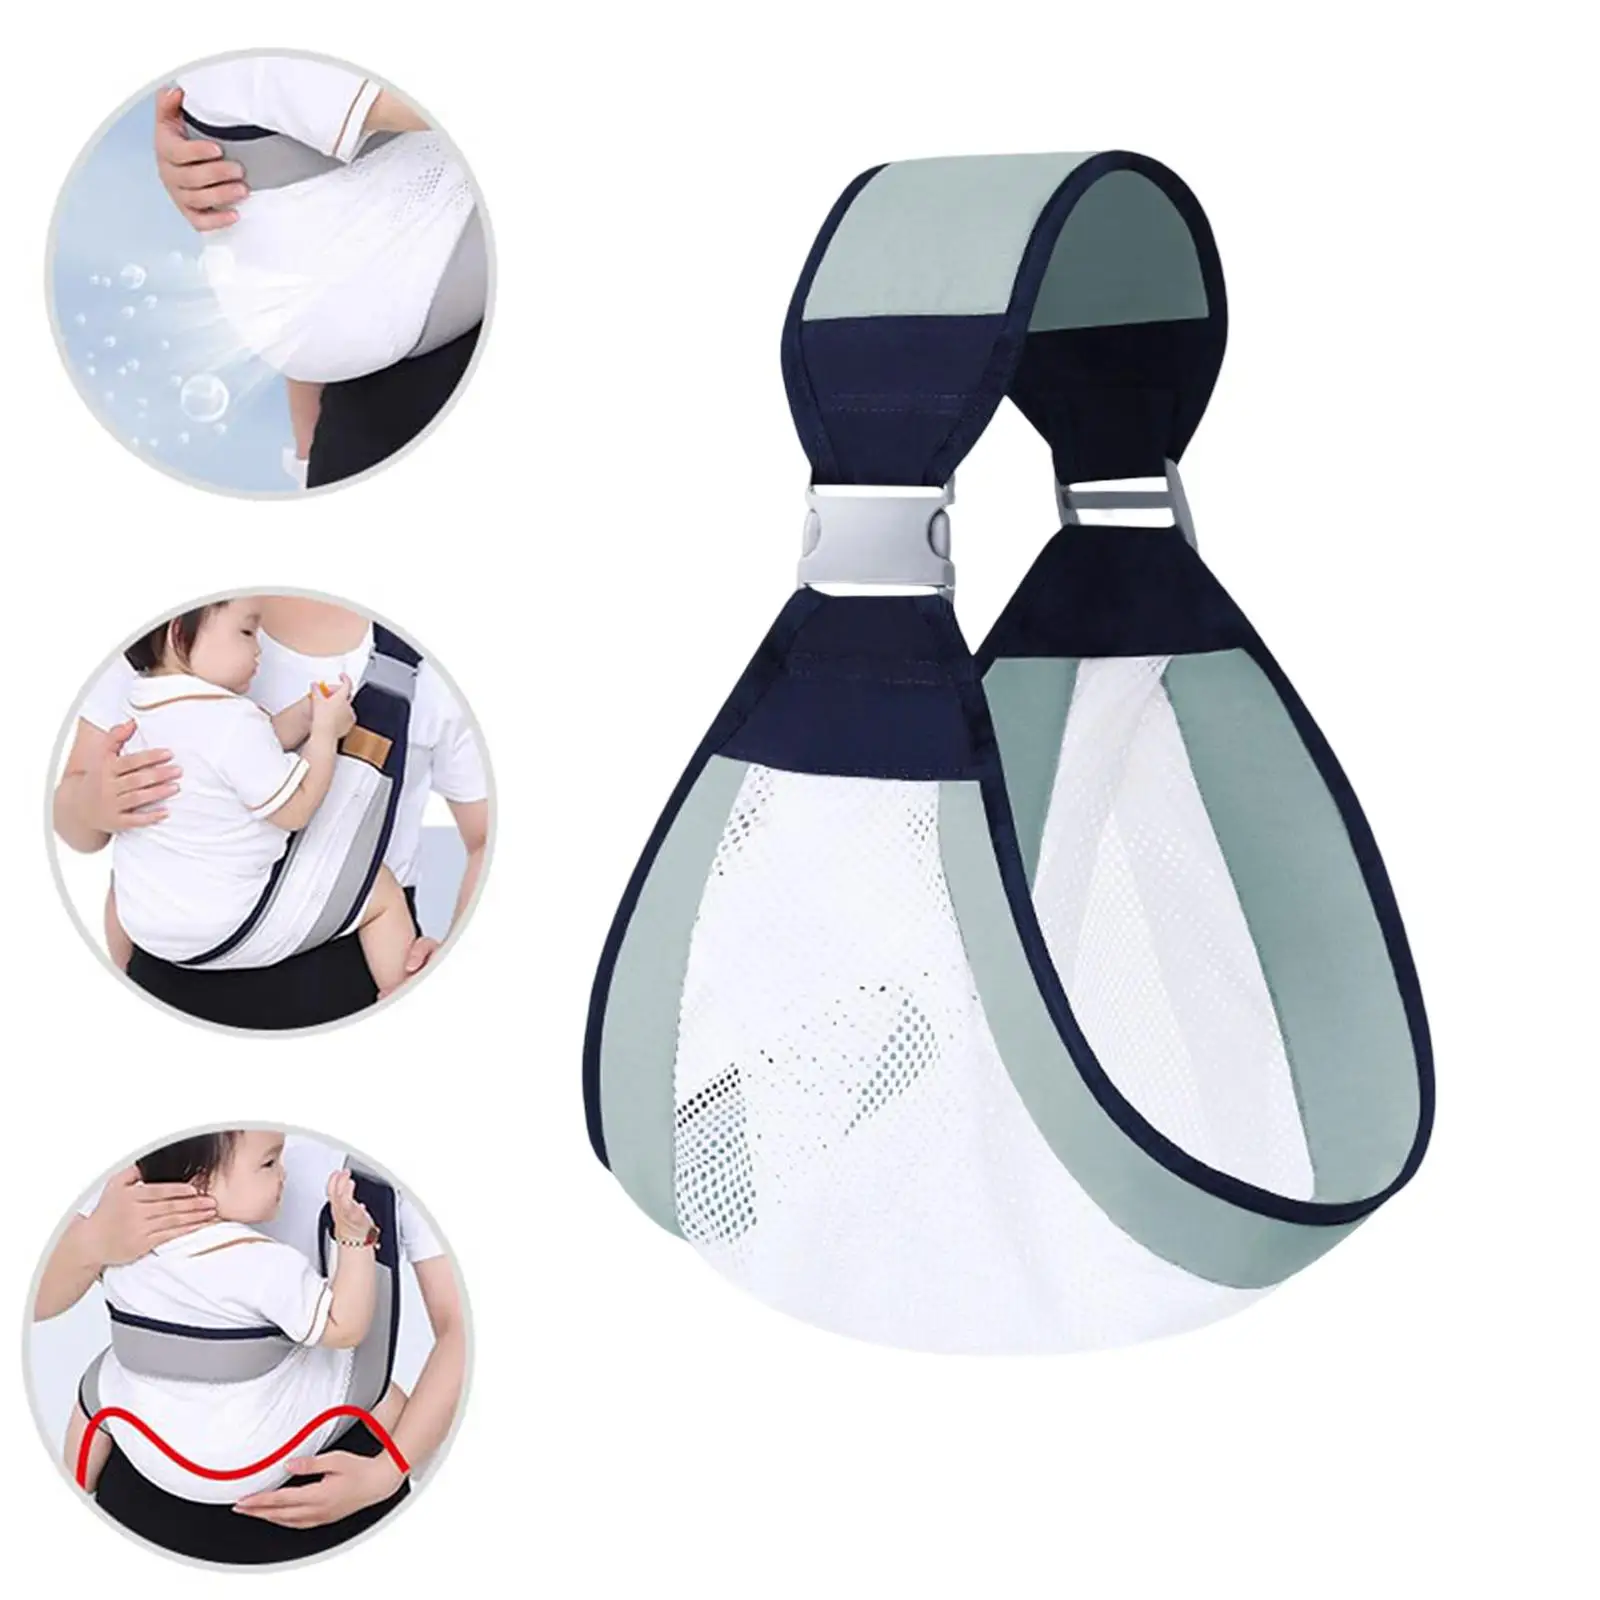 Baby Carrier Breastfeeding Carriers Baby Holder Straps Mesh Infant Wrap Soft